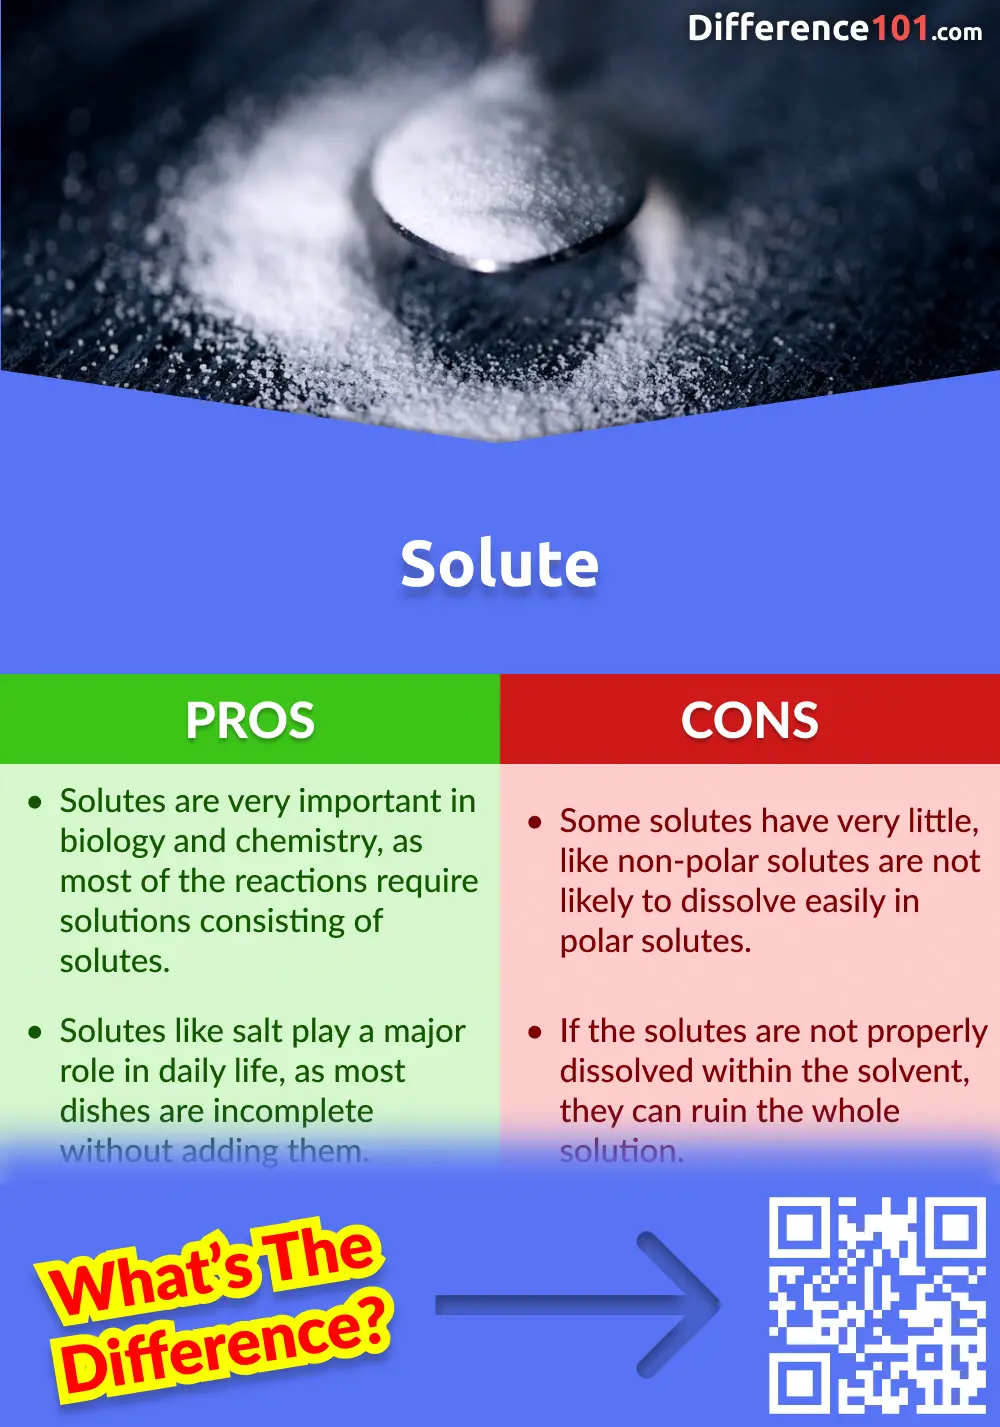 Solute Pros and Cons